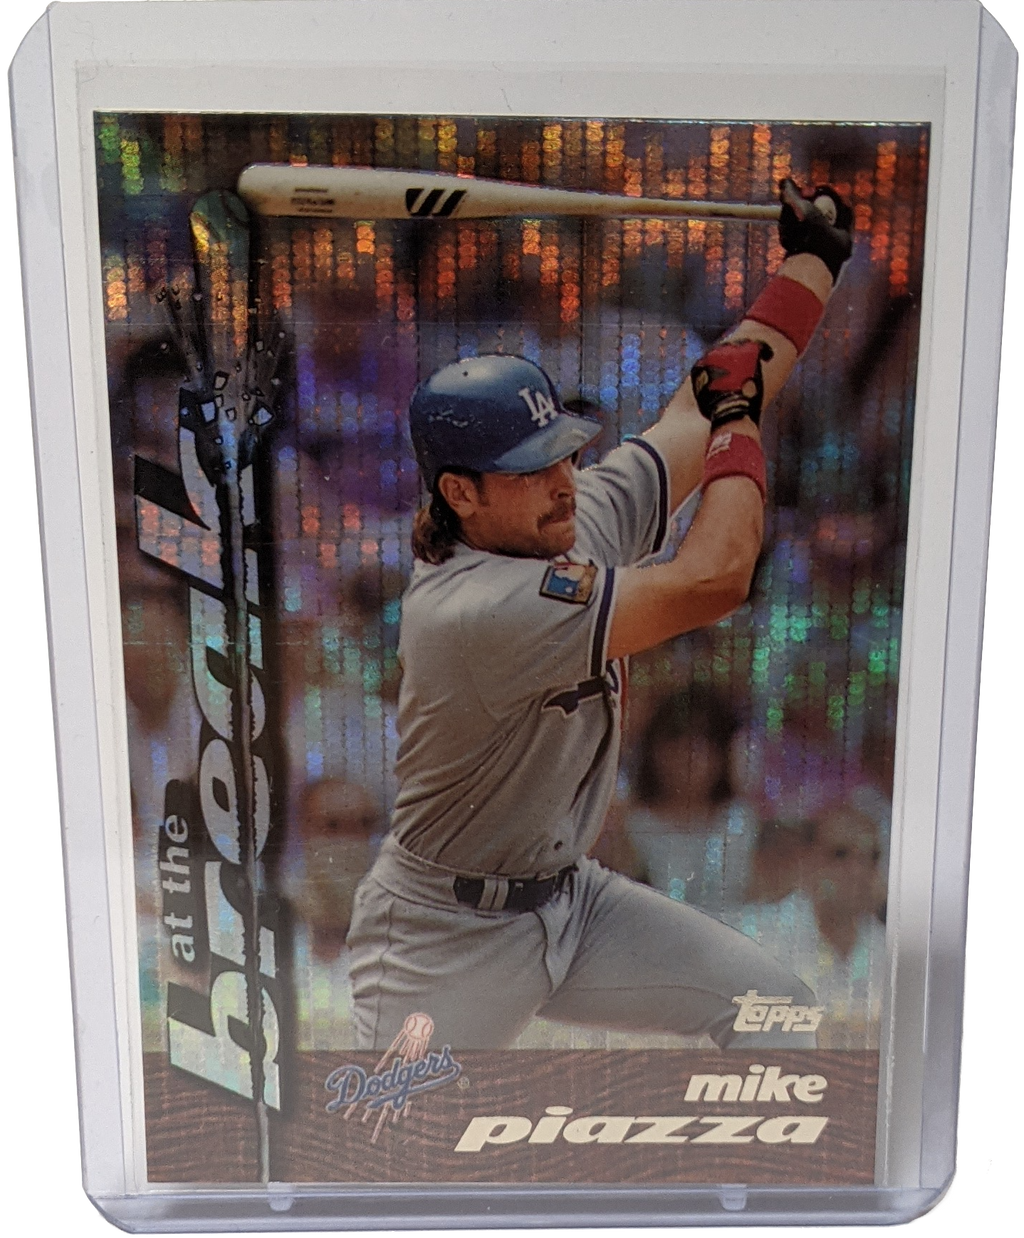 1995 Topps Traded Mike Piazza - Power Booster at the Break